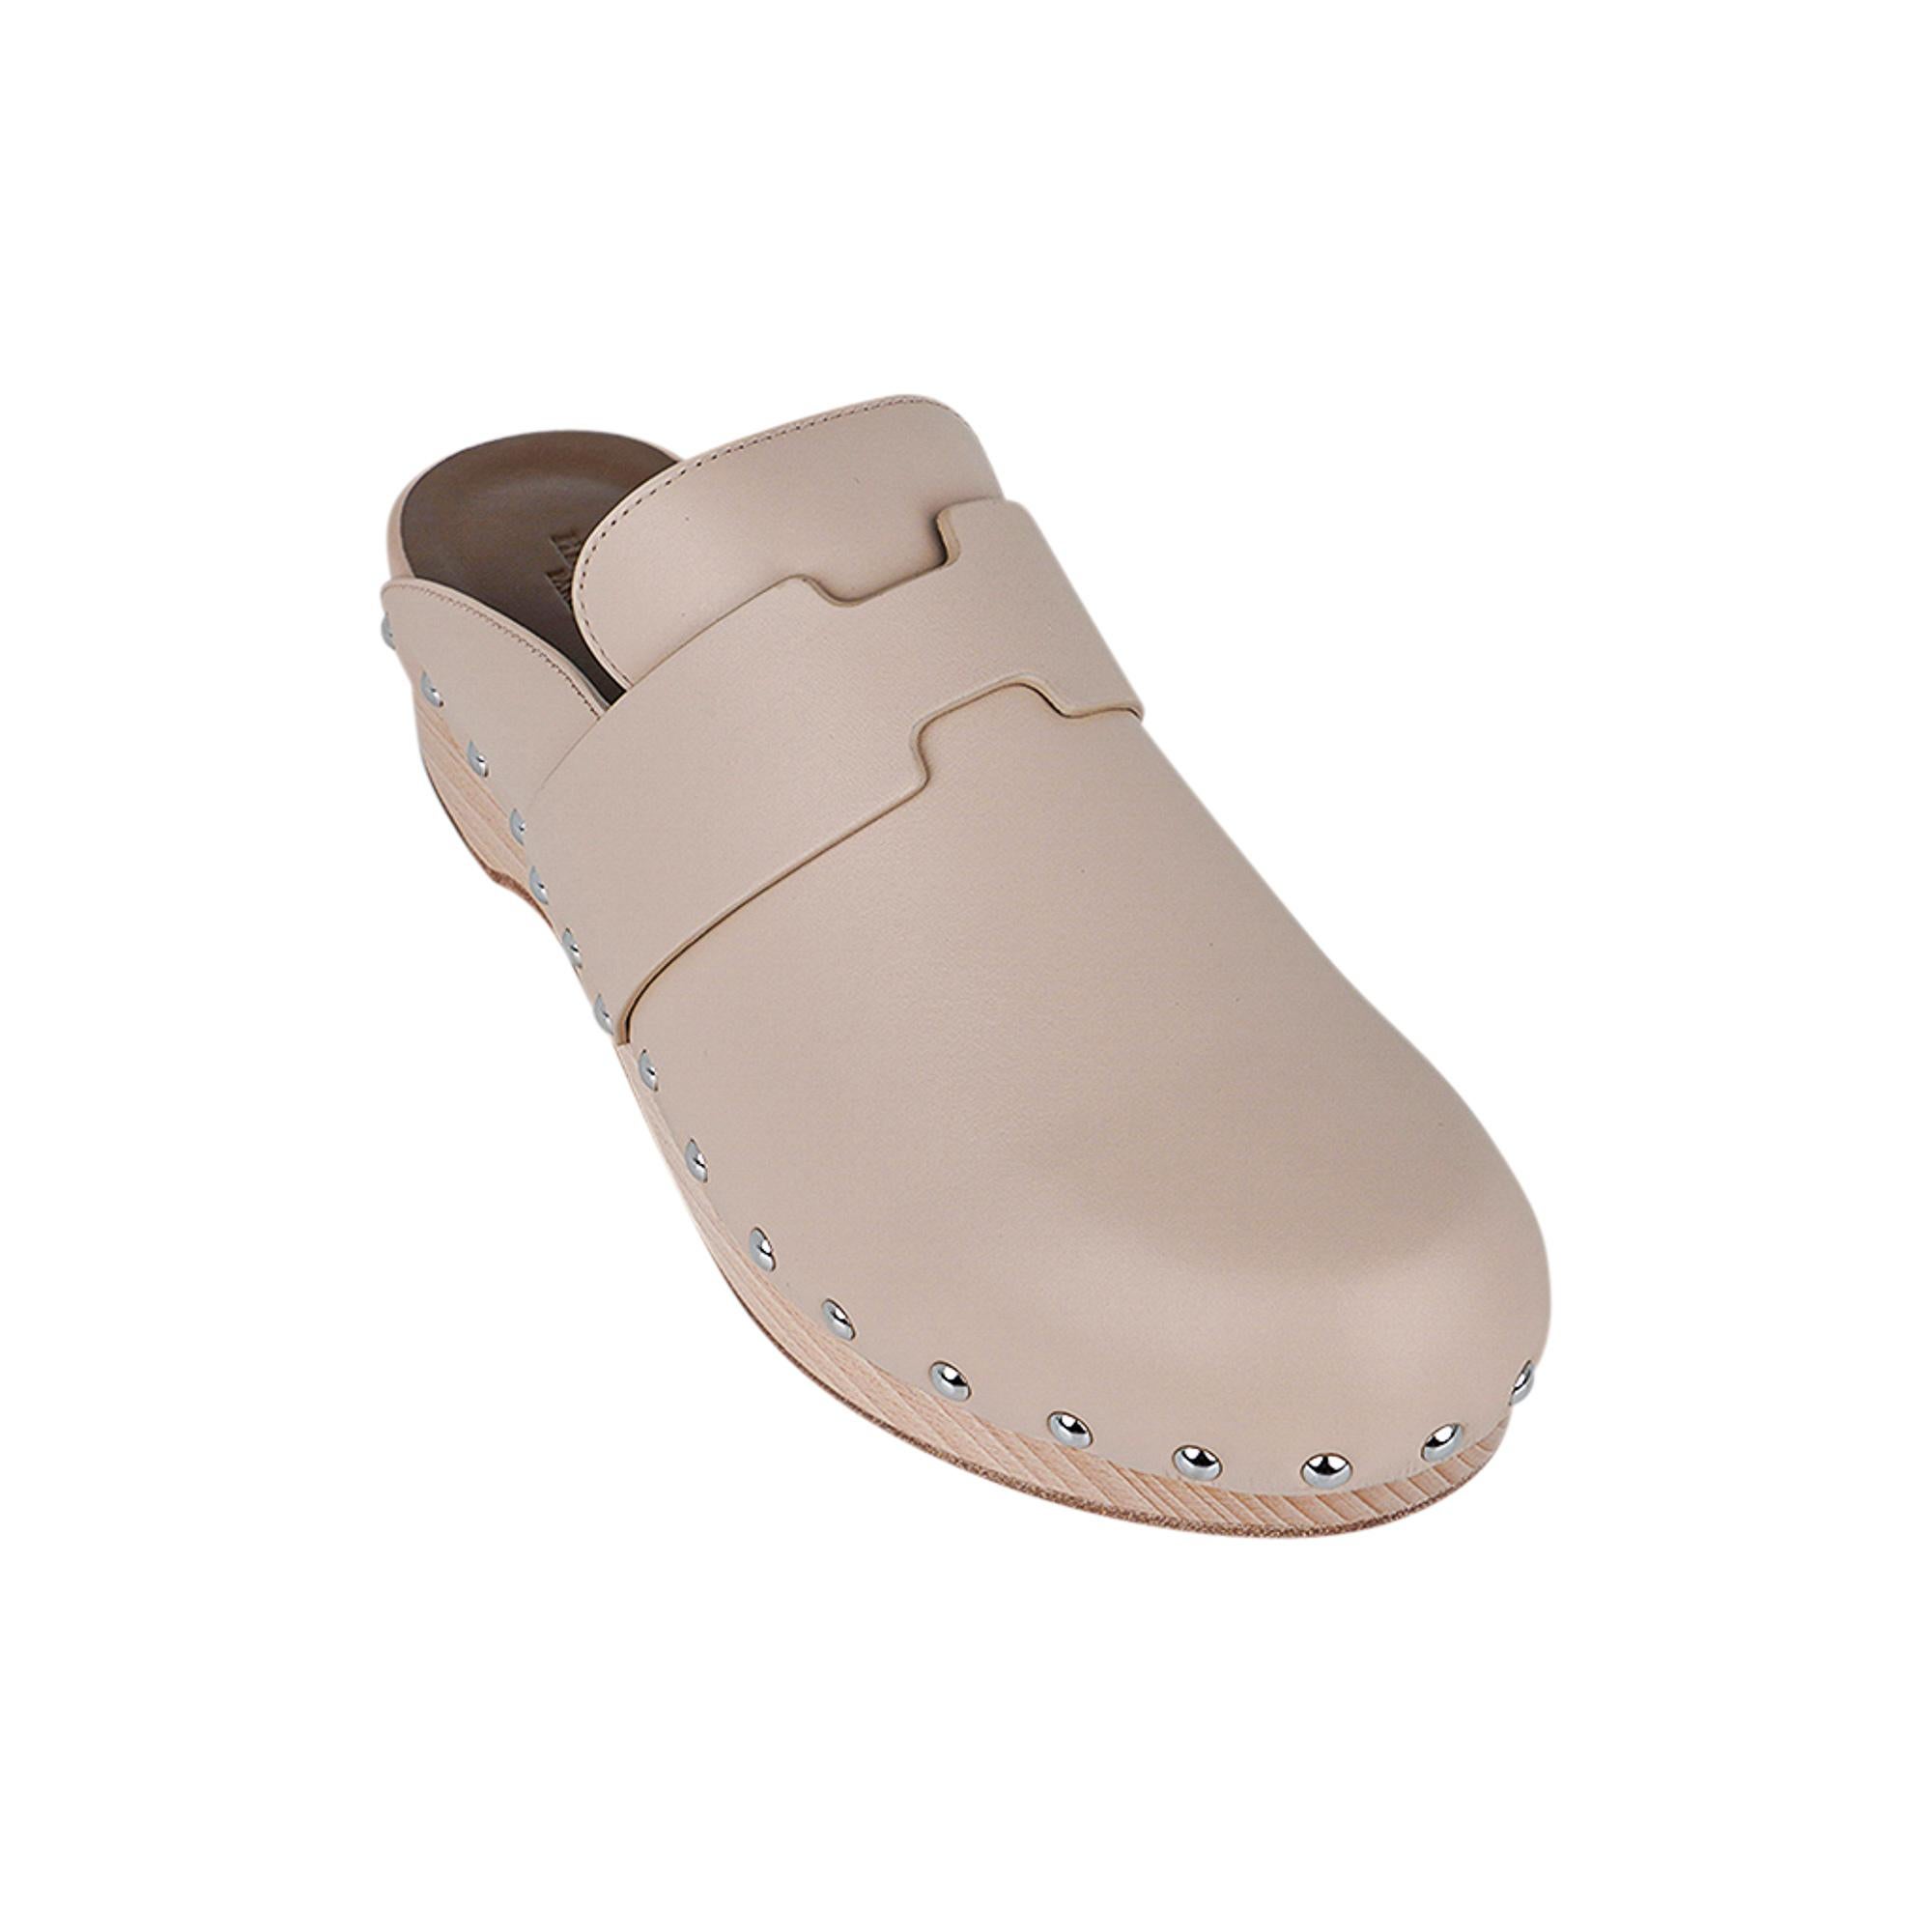 Mightychic offers Hermes Calya Mule featured in Hetre.
Smooth calfskin with H cutout detail.
Light Beechwood sole.
These chic casual shoes are the trend as clogs are
set to be the IT shoes for the season.
Comes with sleepers and signature Hermes